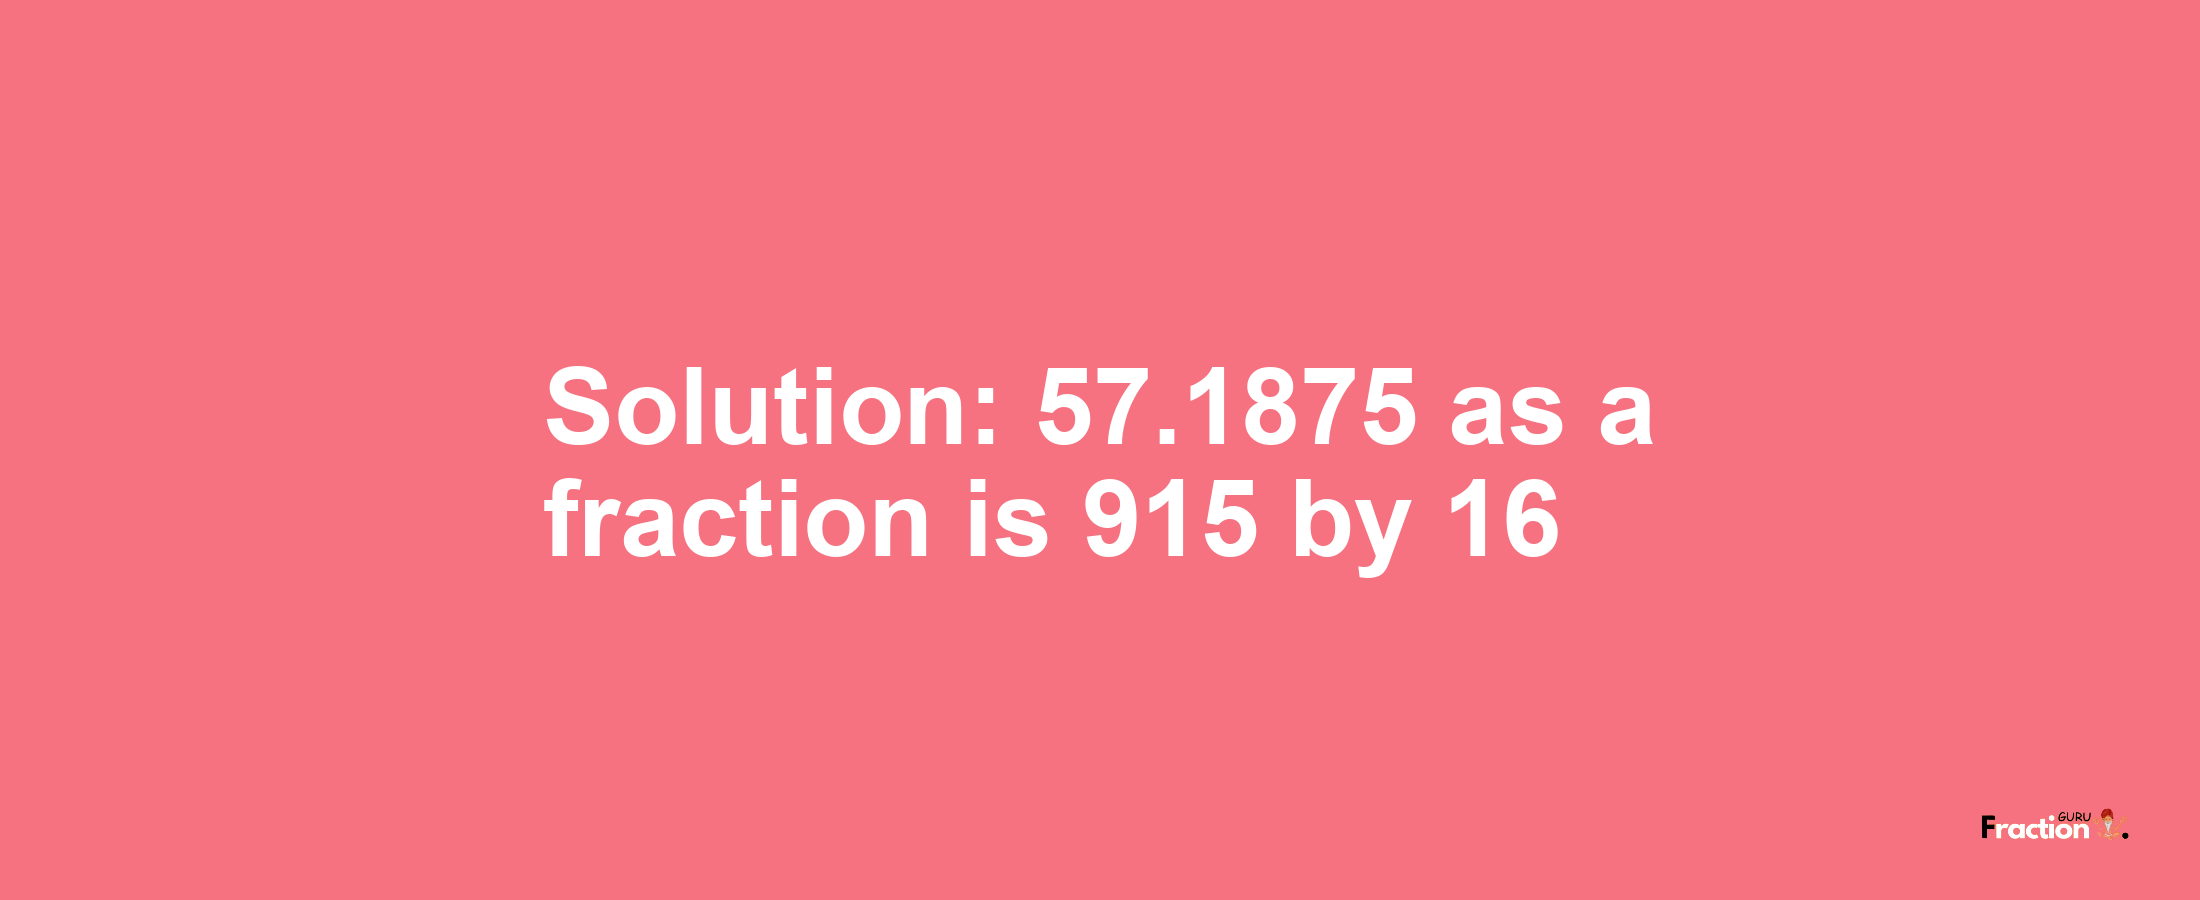 Solution:57.1875 as a fraction is 915/16